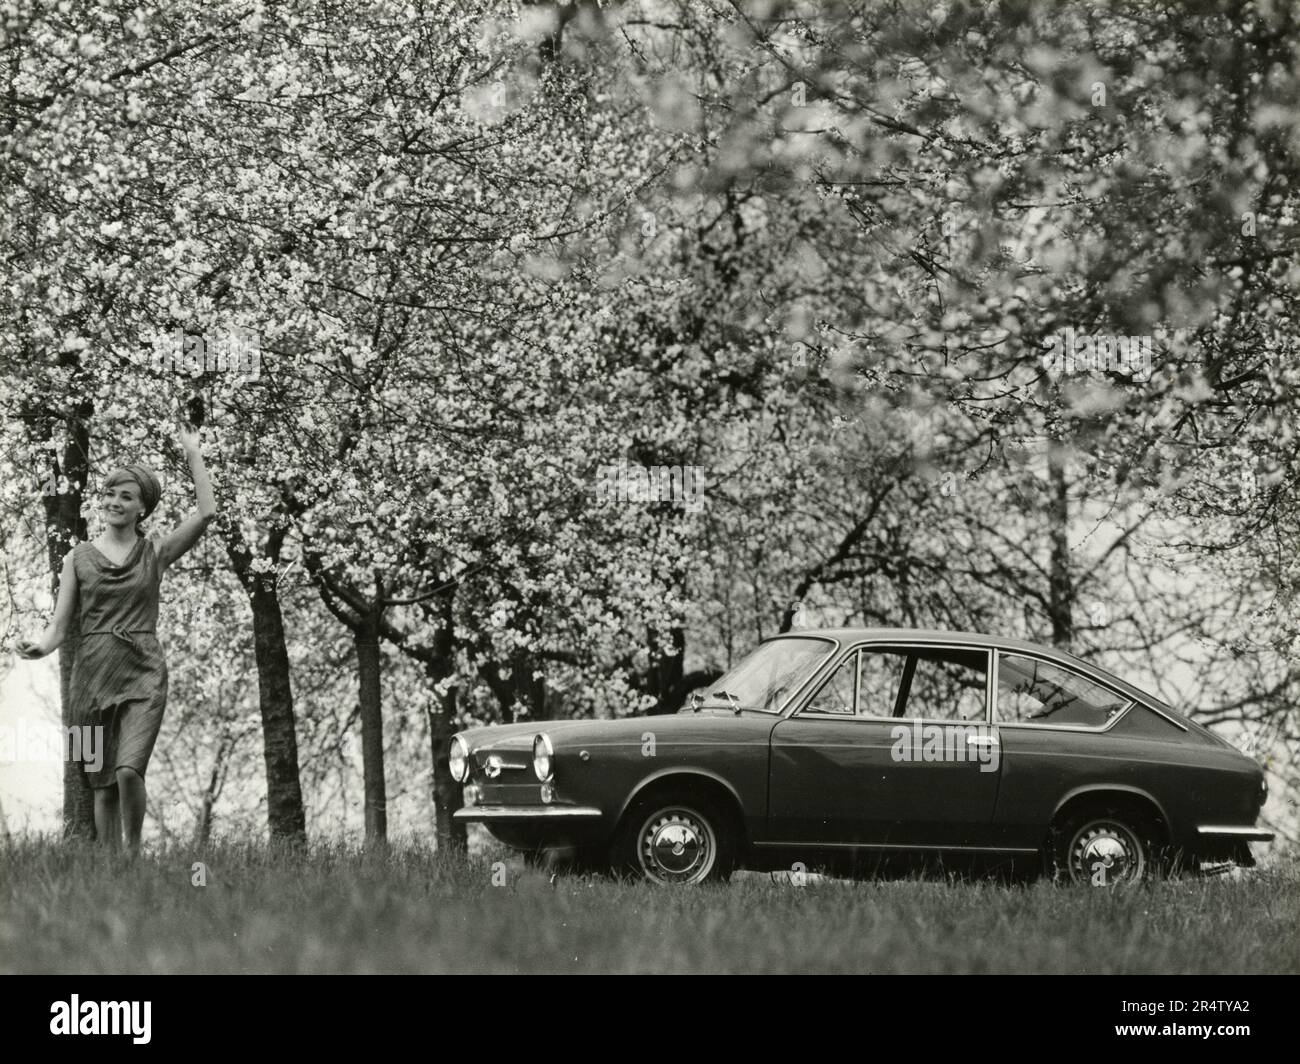 A woman and a FIAT 850 Coupè automobile in a orchard in flower, Italy 1960s Stock Photo